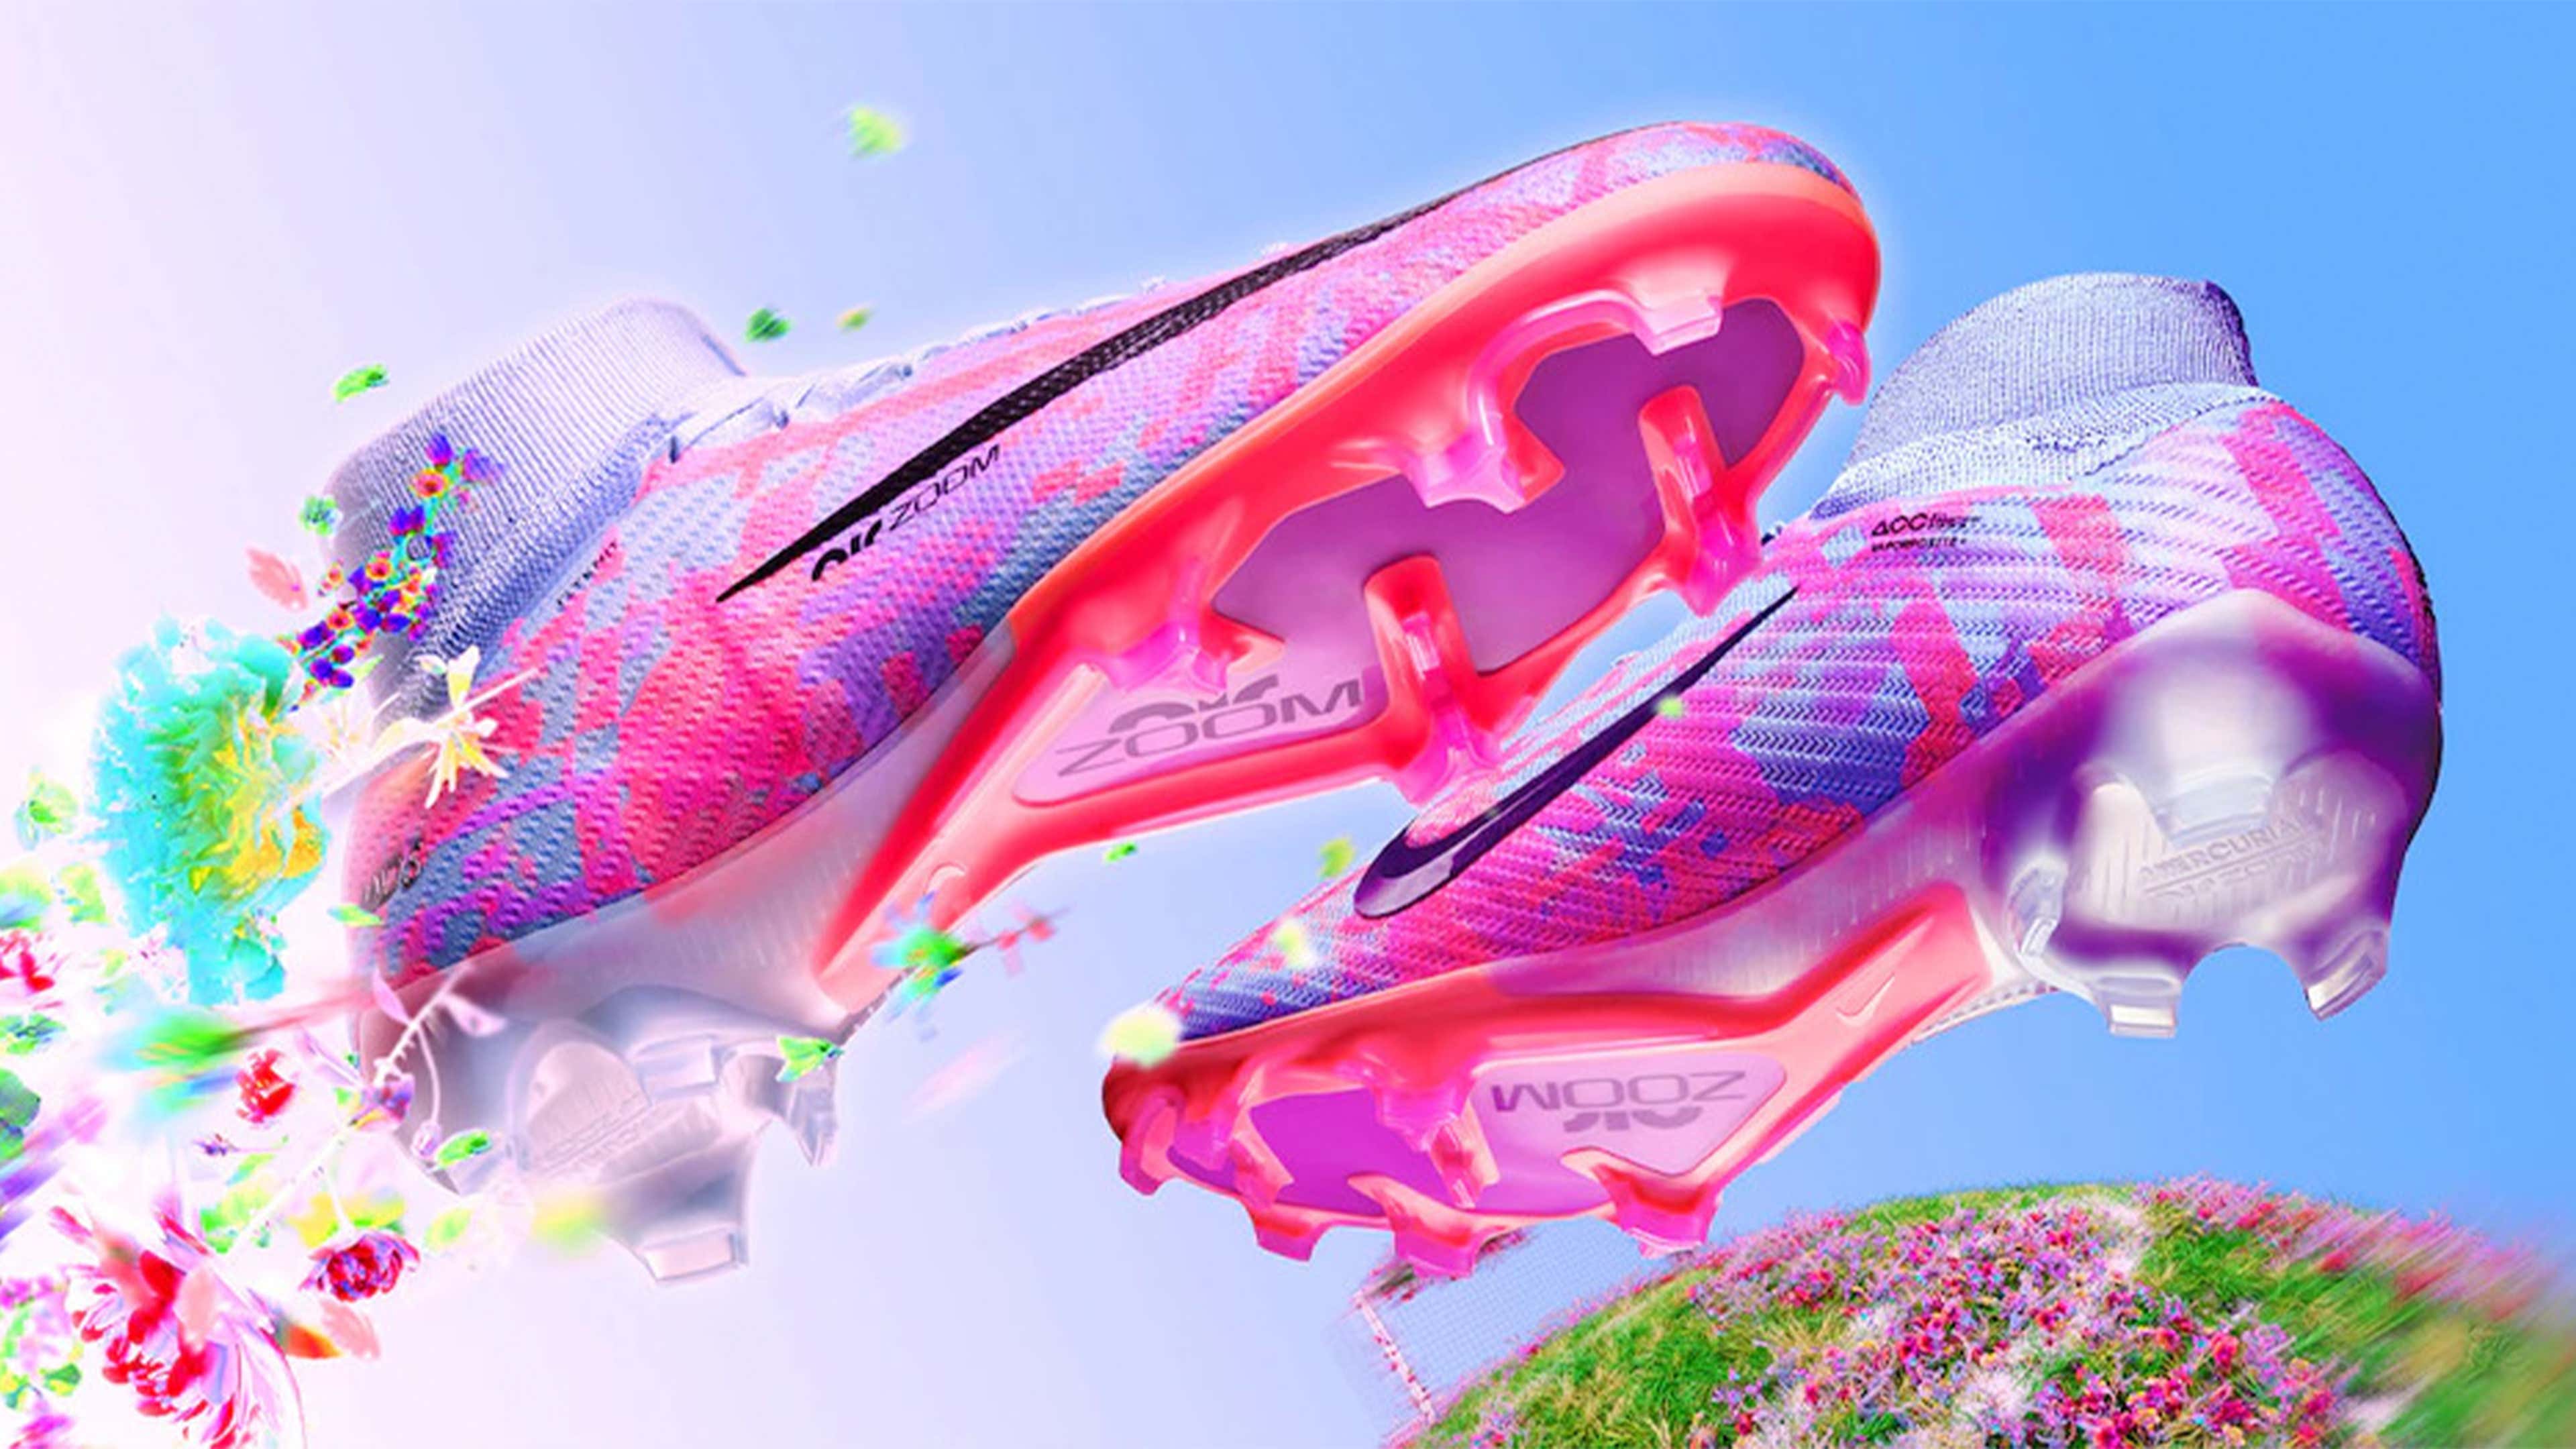 speaker January Strong wind Nike unveil floral Mercurial Dream Speed 006 boots | Goal.com US